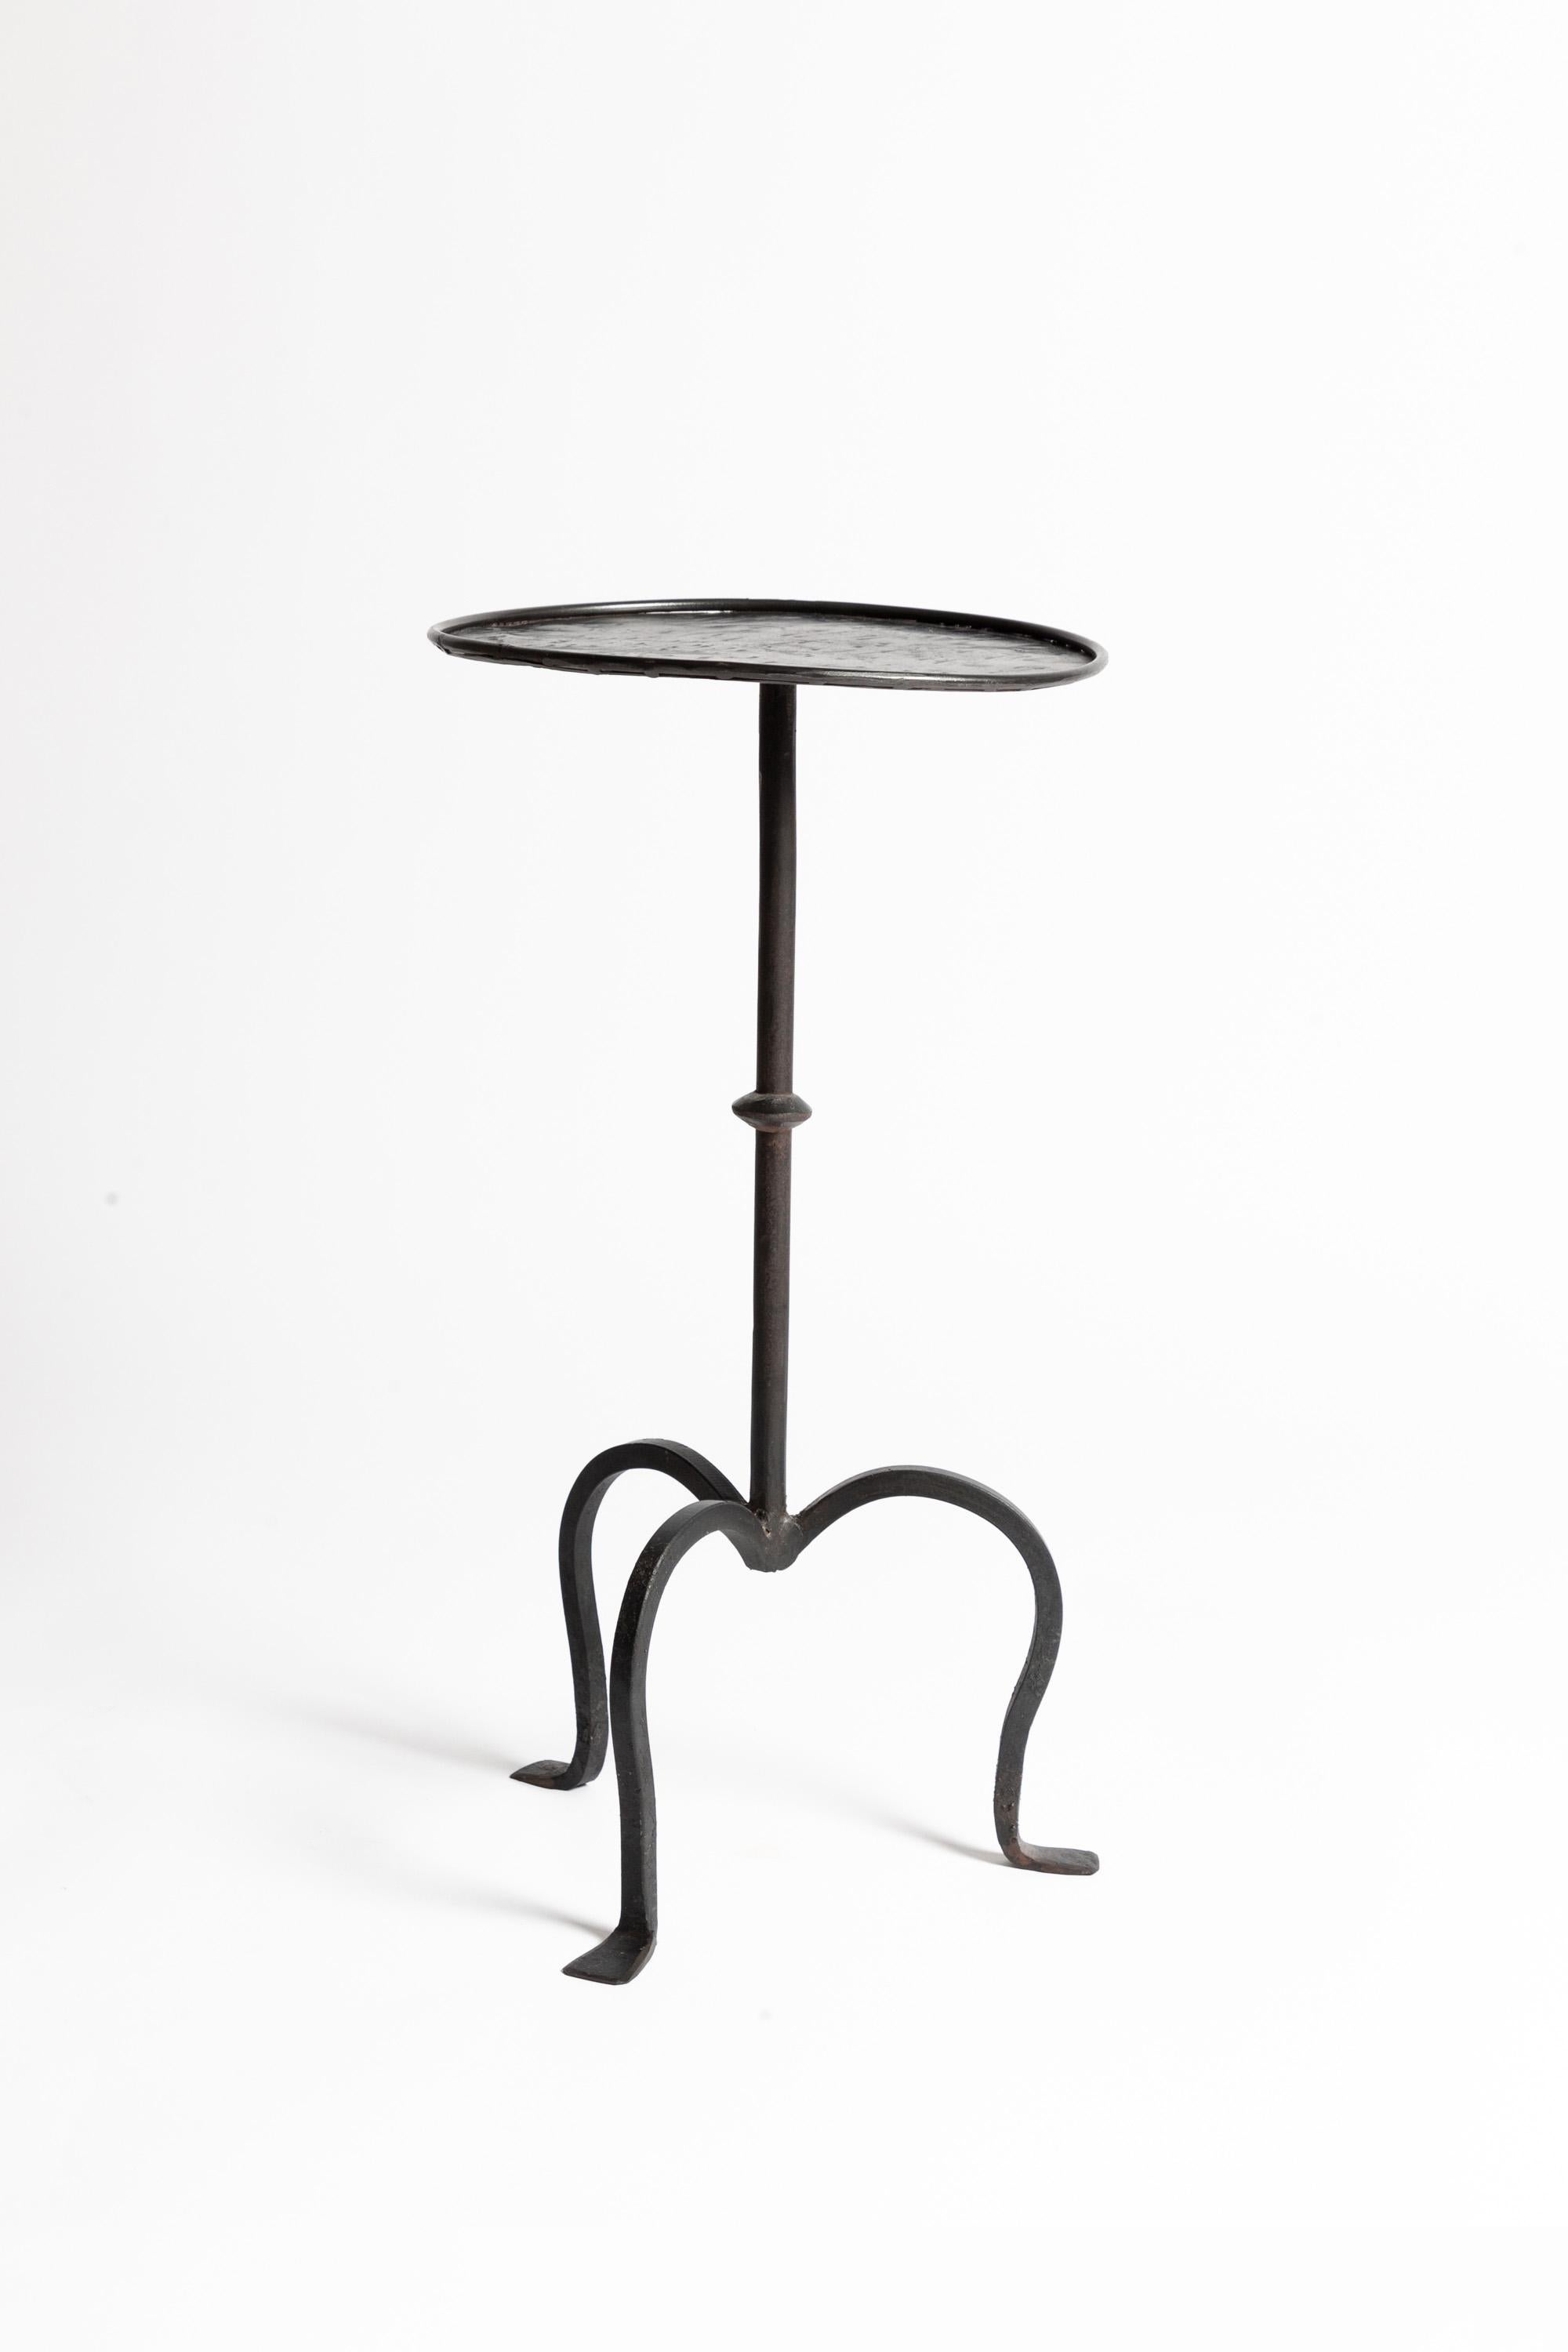 A charming vintage wrought iron martini table with a blackened steel finish.

Naively wrought with a distressed pattern to the circular top. 

Lovely overall patina. Sturdy and solid.
